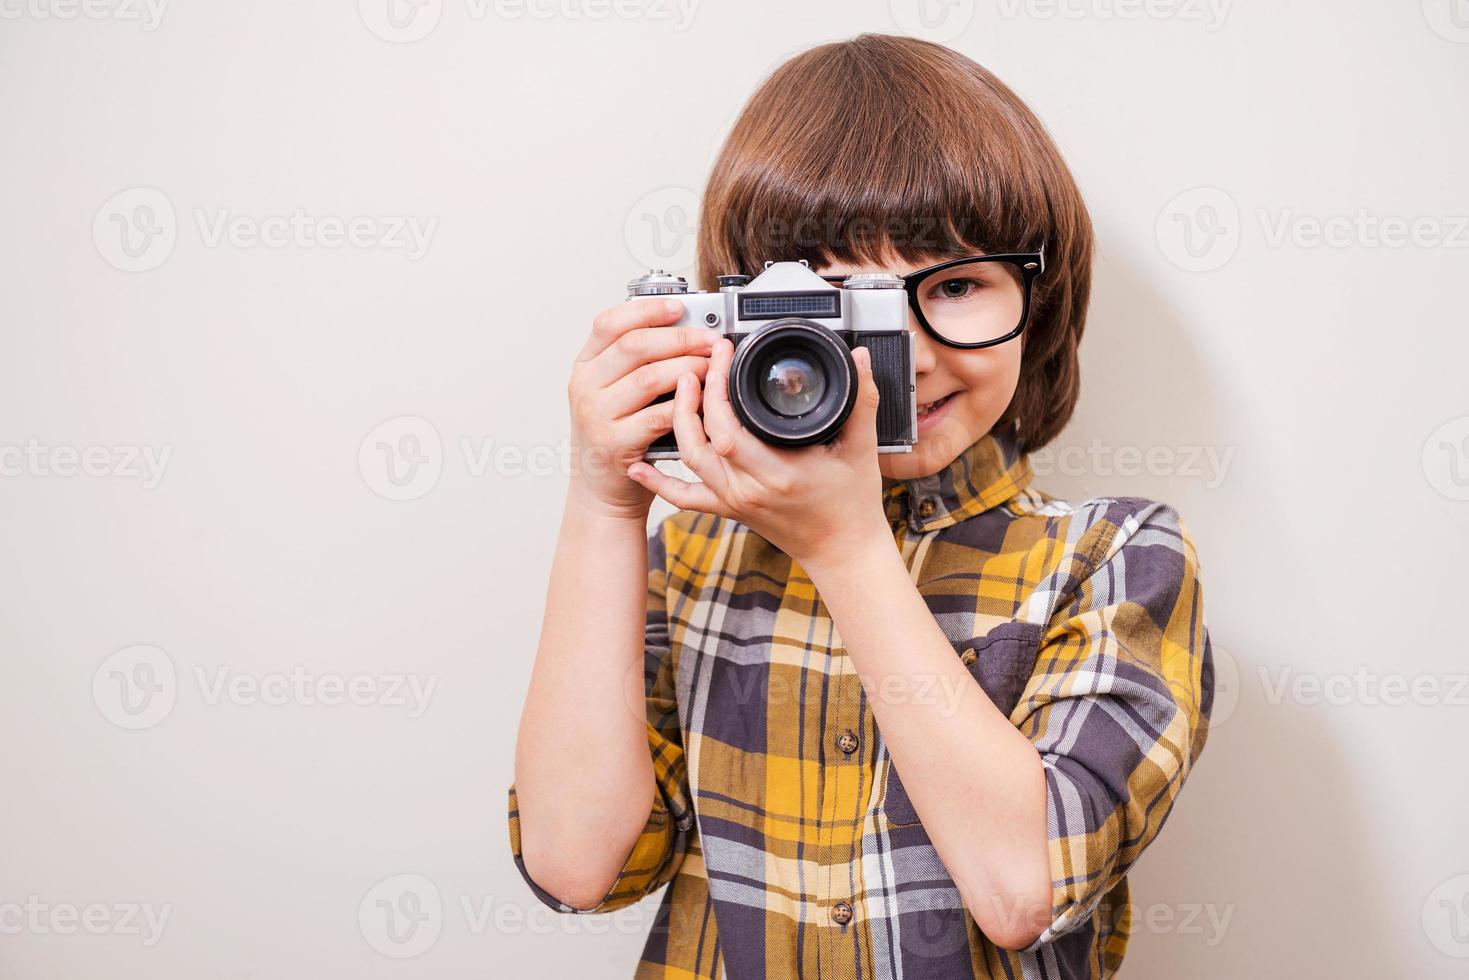 He is fond of shooting. Little boy in eyewear holding camera and smiling while standing against grey background photo